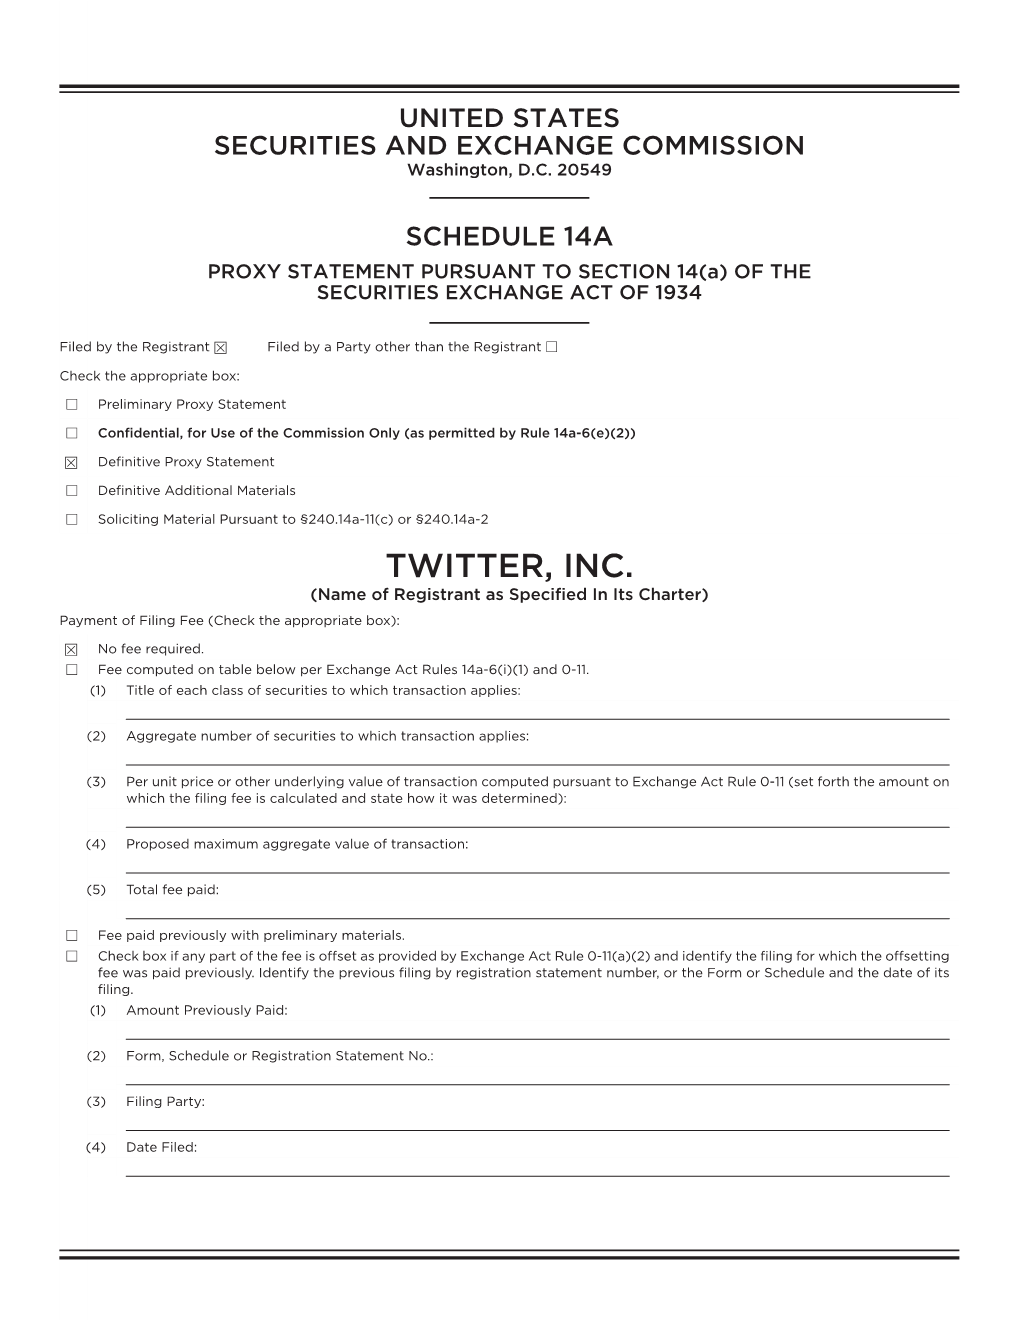 TWITTER, INC. (Name of Registrant As Specified in Its Charter) Payment of Filing Fee (Check the Appropriate Box)